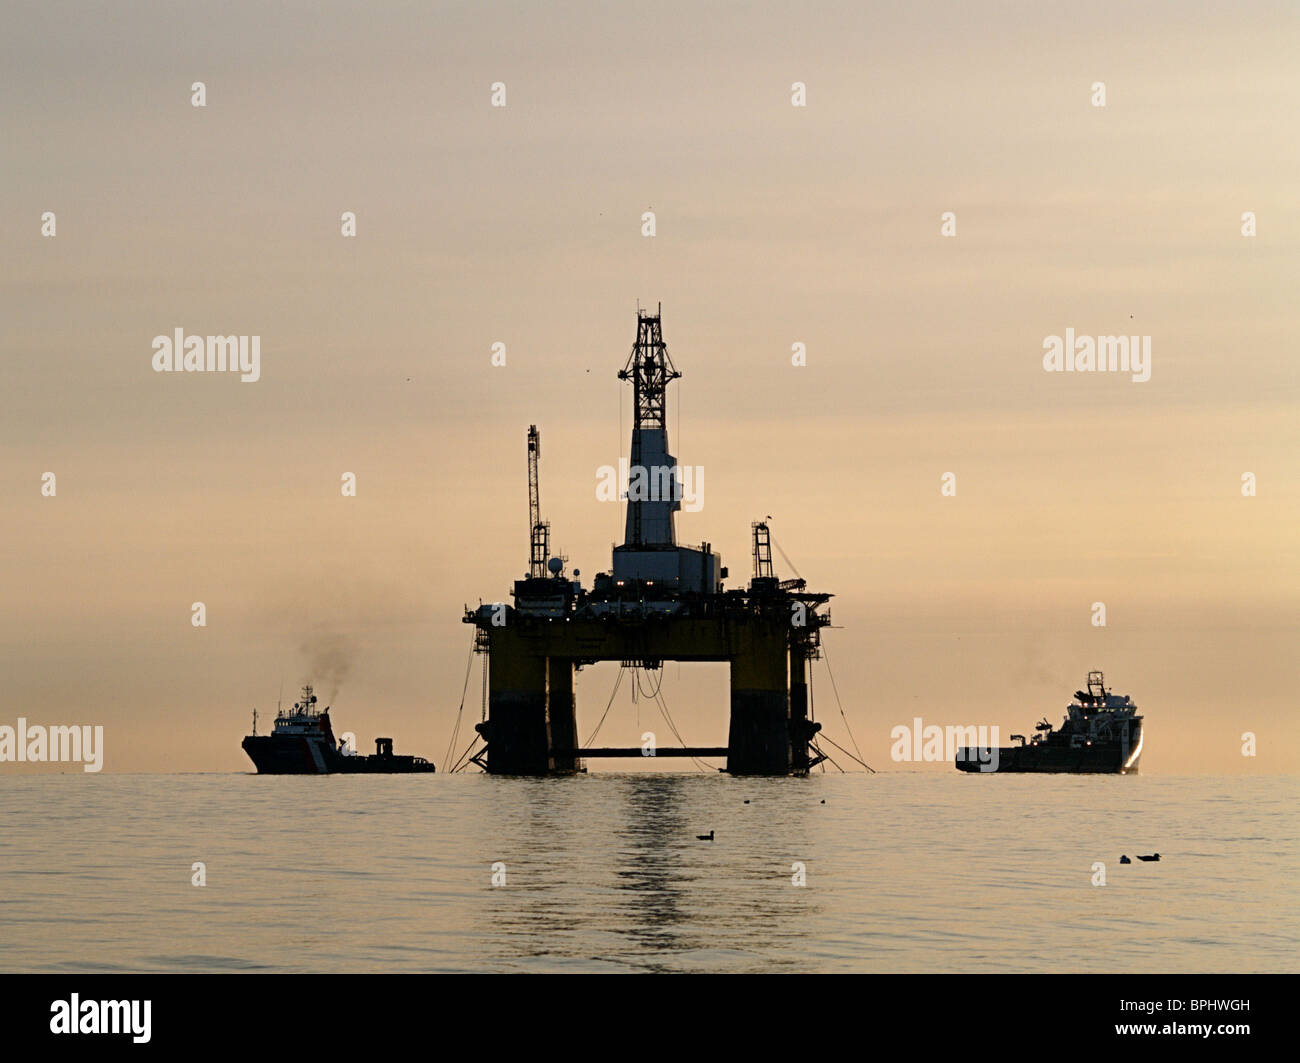 The Transocean Rather, a semi-submersible oil drilling rig, is silhouetted against the dawn, Cromarty Firth, Scotland Stock Photo